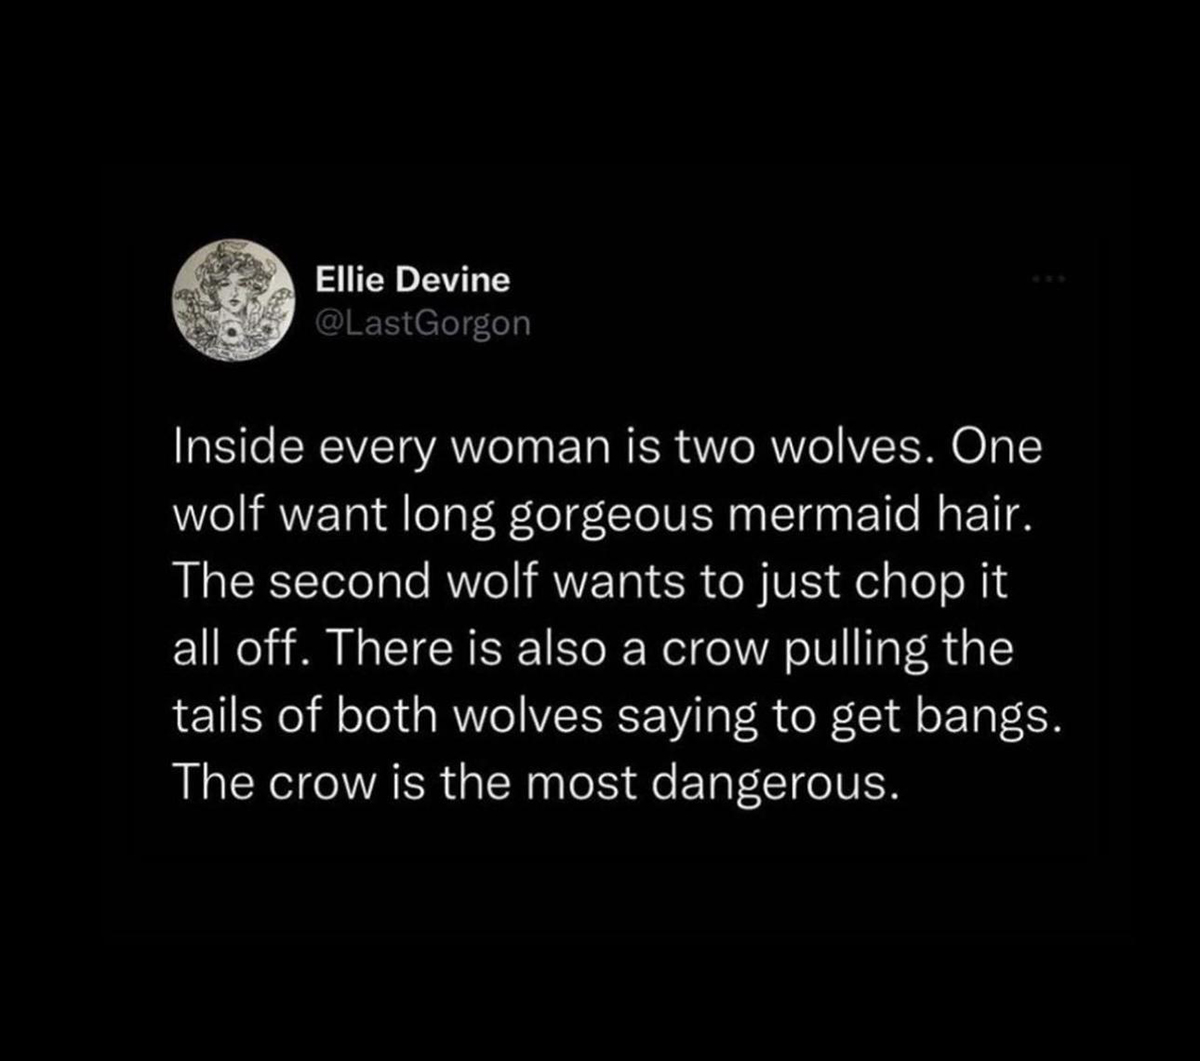 dank memes - inside every woman is two wolves - Ellie Devine Inside every woman is two wolves. One wolf want long gorgeous mermaid hair. The second wolf wants to just chop it all off. There is also a crow pulling the tails of both wolves saying to get ban